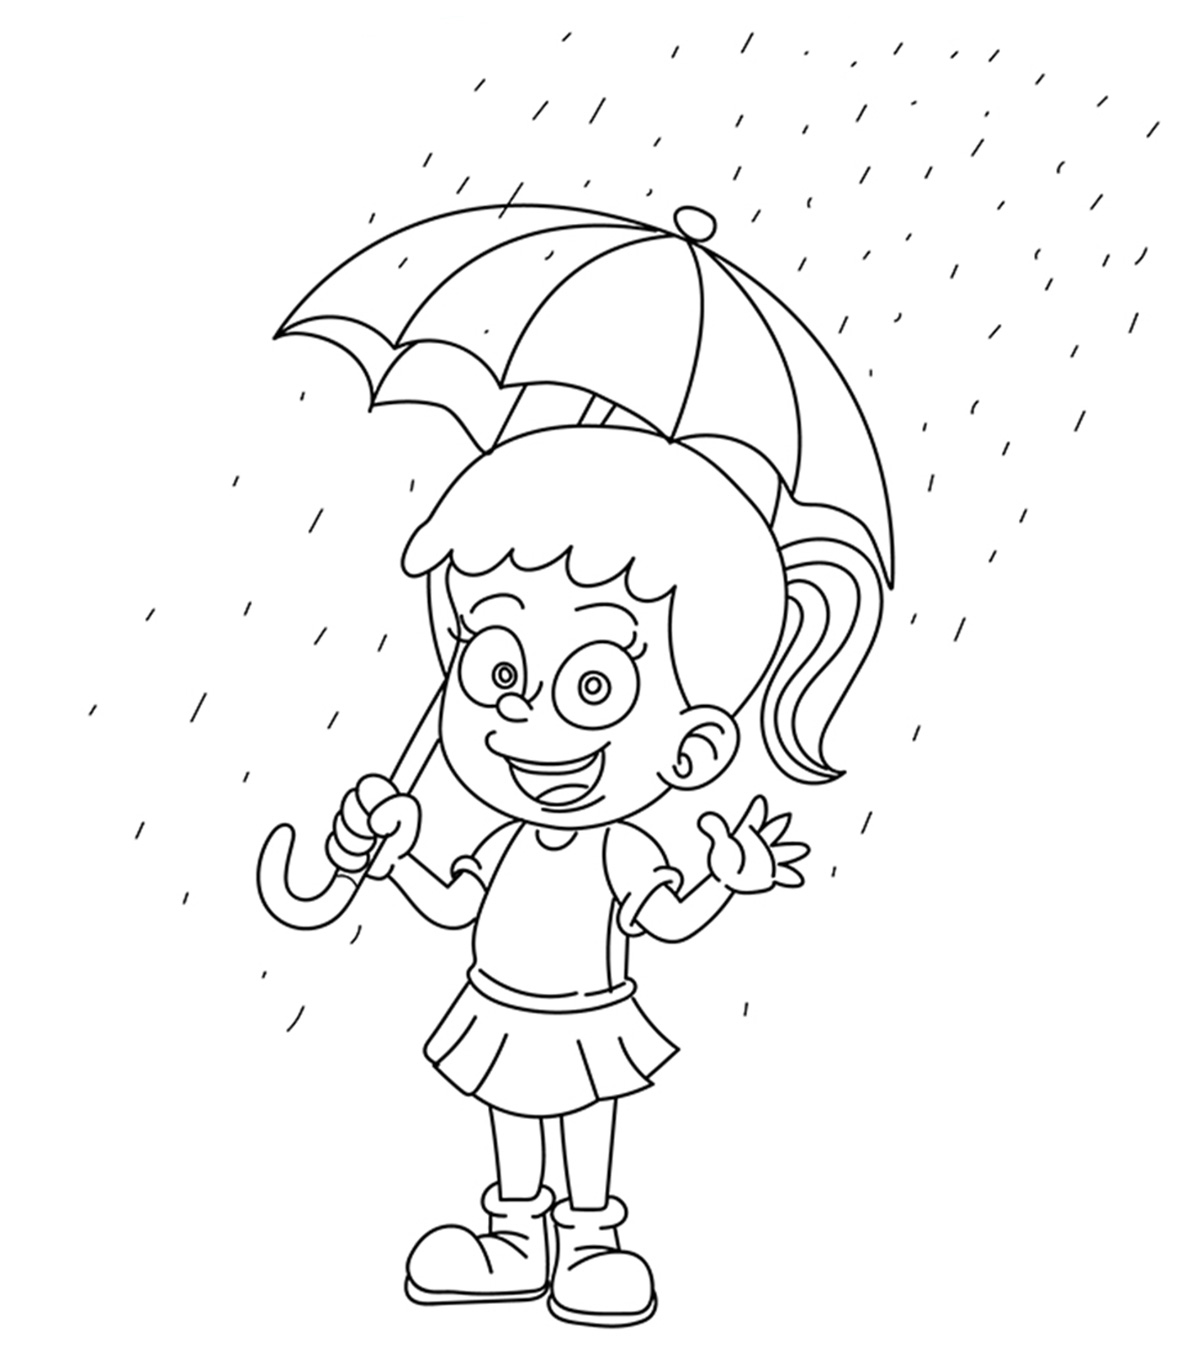 Top 10 Rain Coloring Pages For Your Little Ones